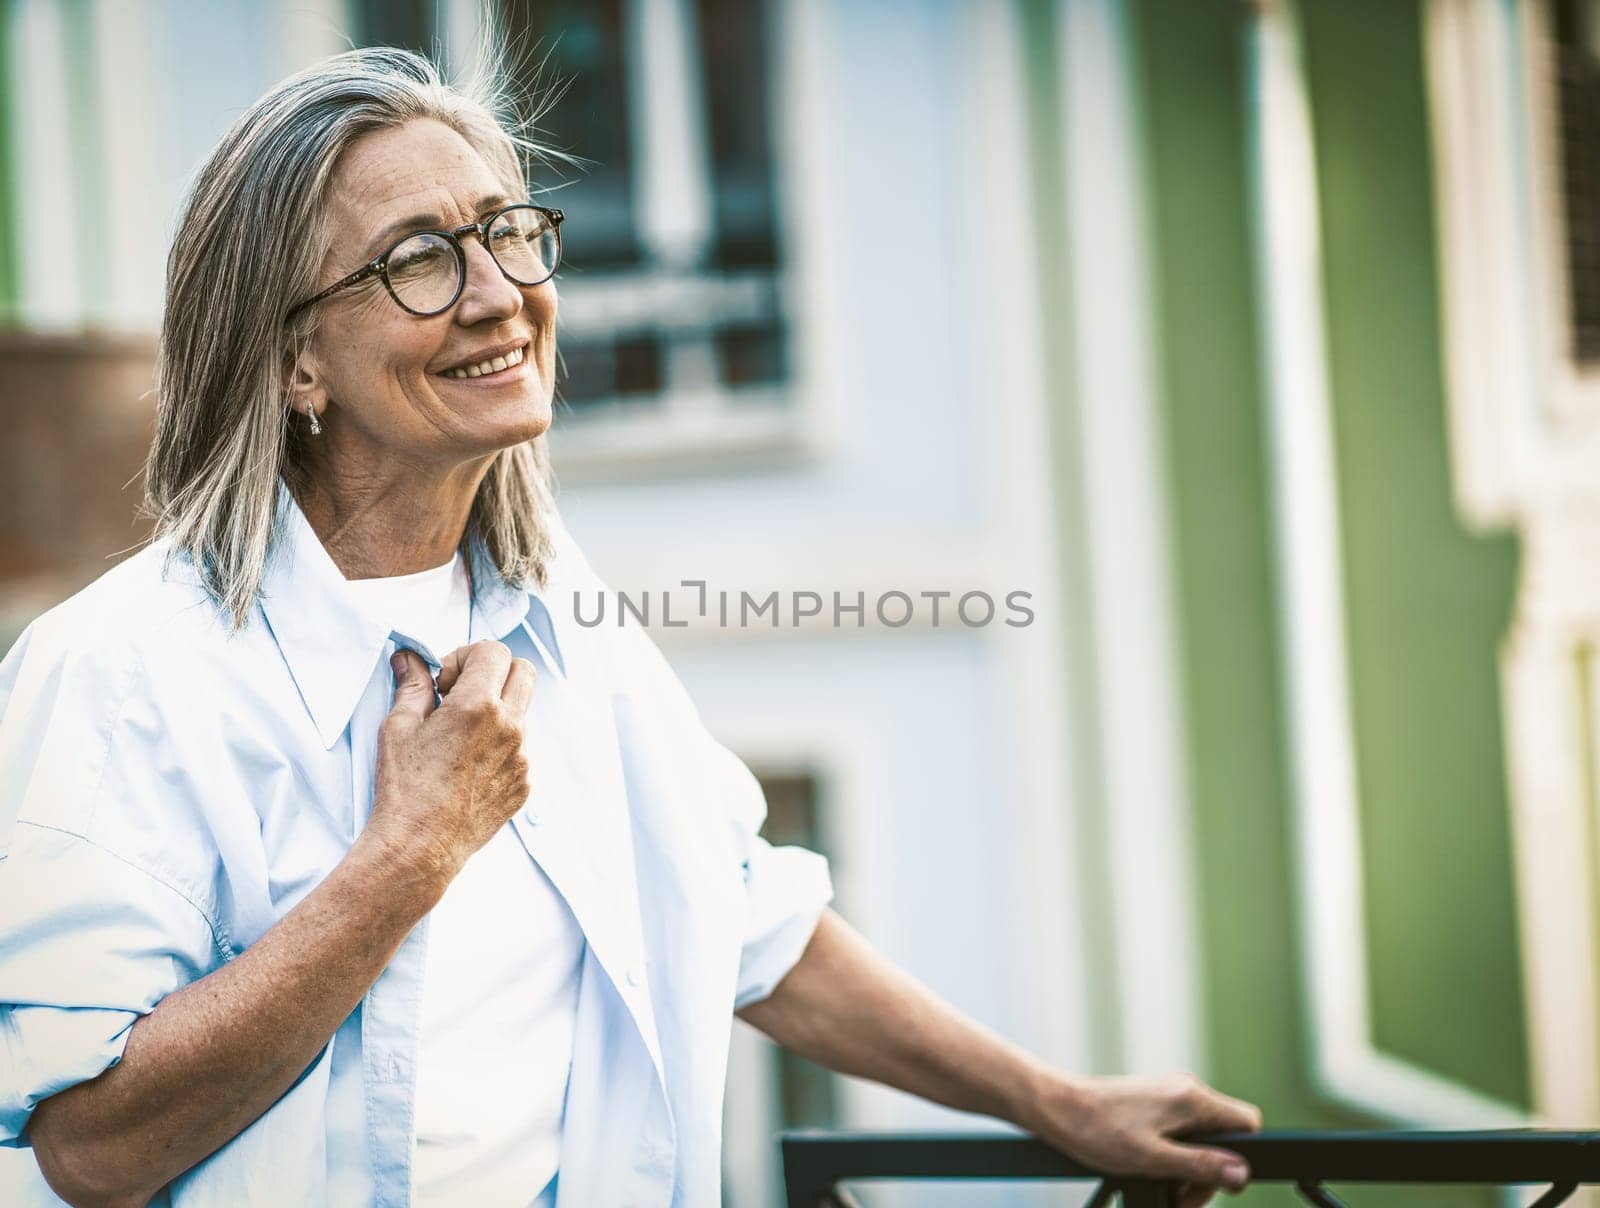 Happiness in old age, mature woman with radiant smile standing on balcony overlooking old street in Europe. Senior lady in joyful and contented state, embracing beauty of aging gracefully. by LipikStockMedia